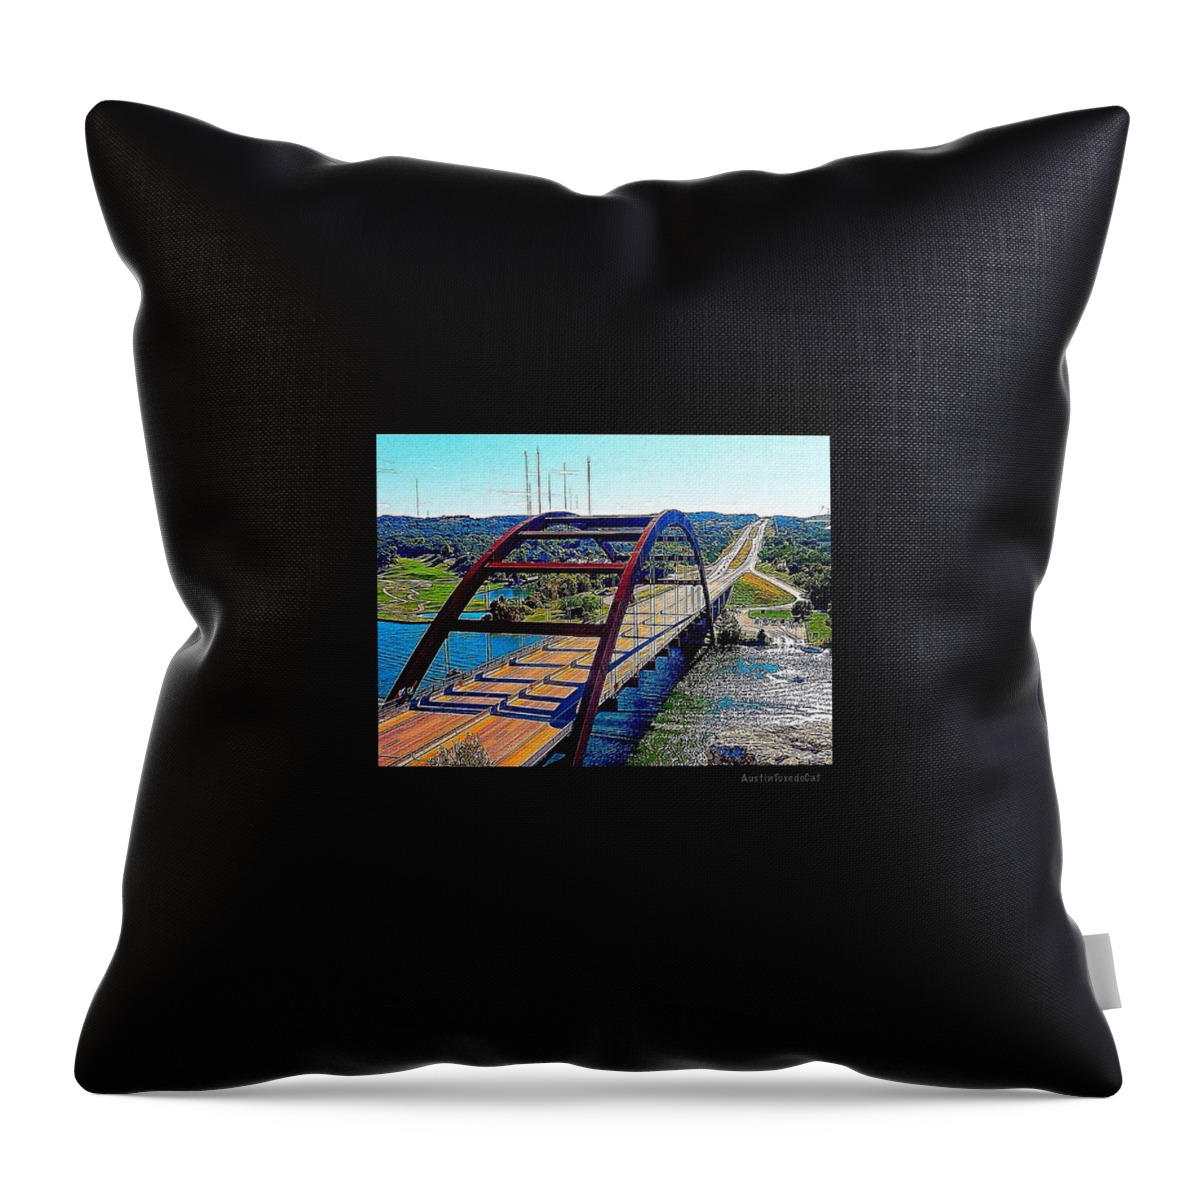 Beautiful Throw Pillow featuring the photograph Photoshopping My Favorite #austin #1 by Austin Tuxedo Cat